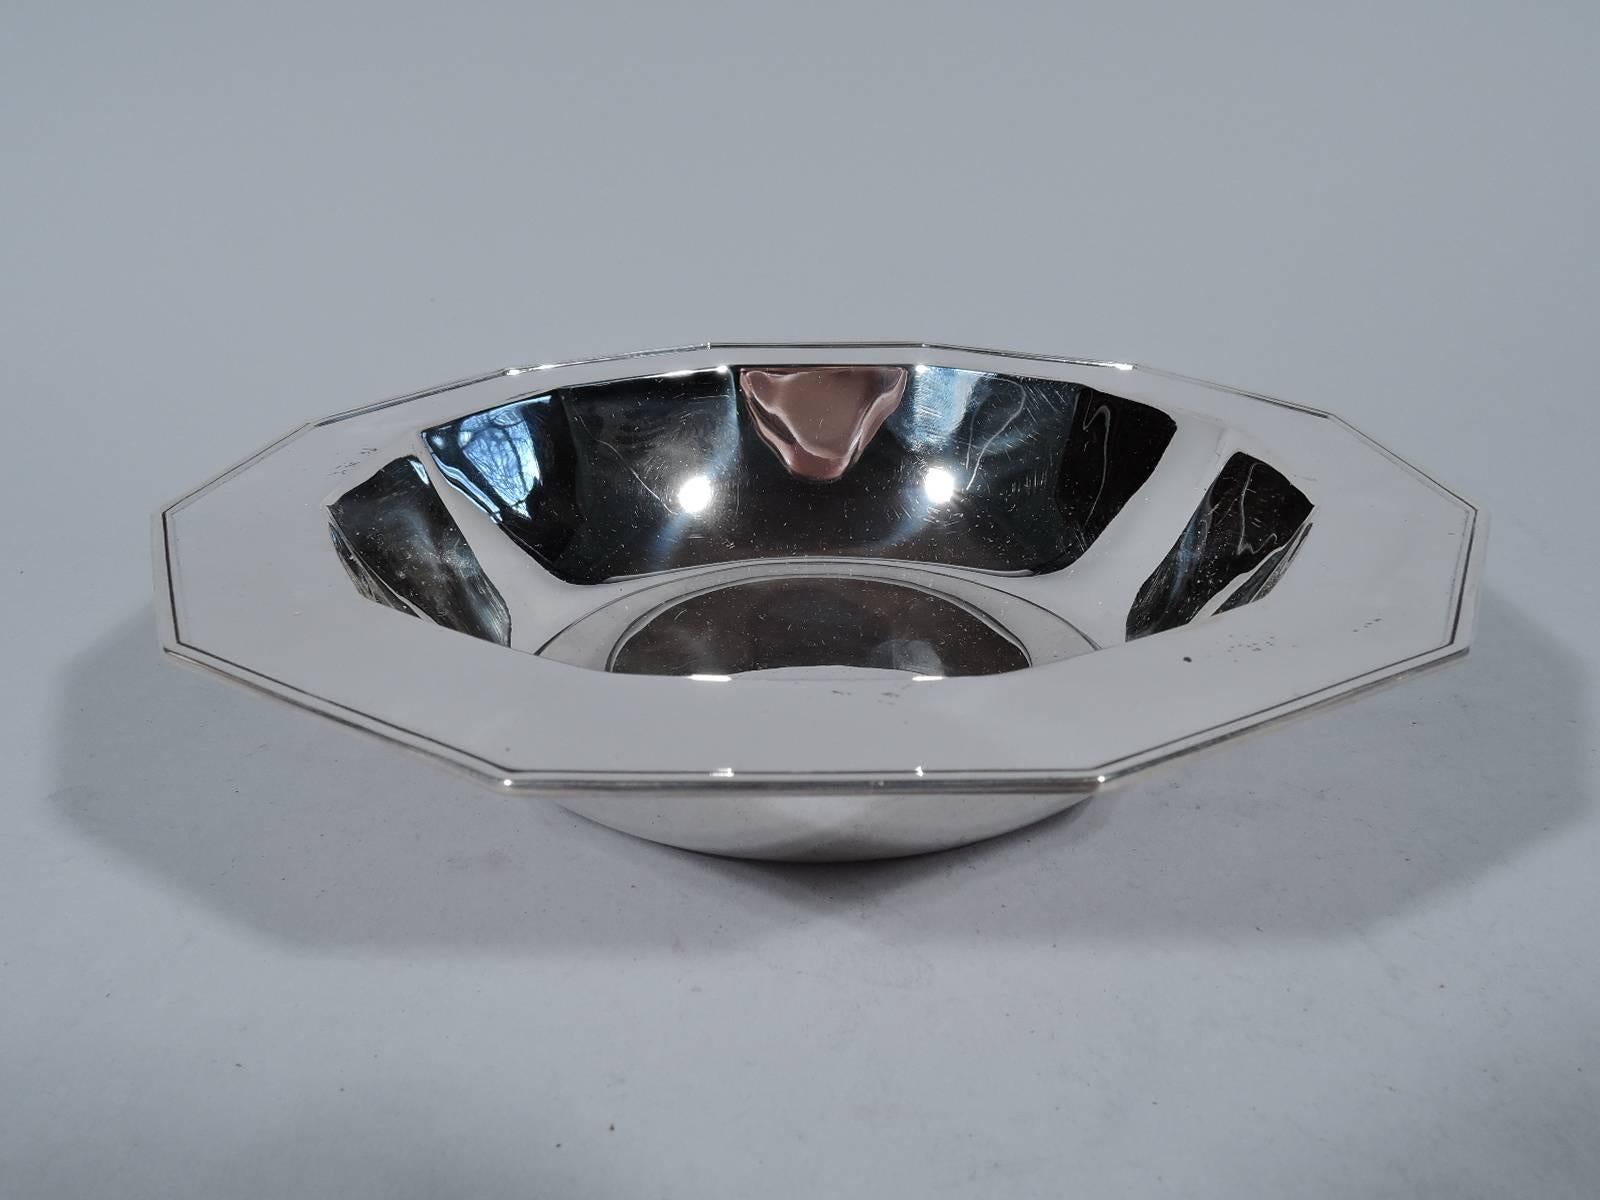 Art Deco bowl. Made by Tiffany & Co. in New York, circa 1910. Circular well, tapering and faceted sides, and flat, molded, and faceted rim. Hallmark includes pattern no. 17717 (first produced in 1910) and director’s letter m (1907-47). Weight: 9.7